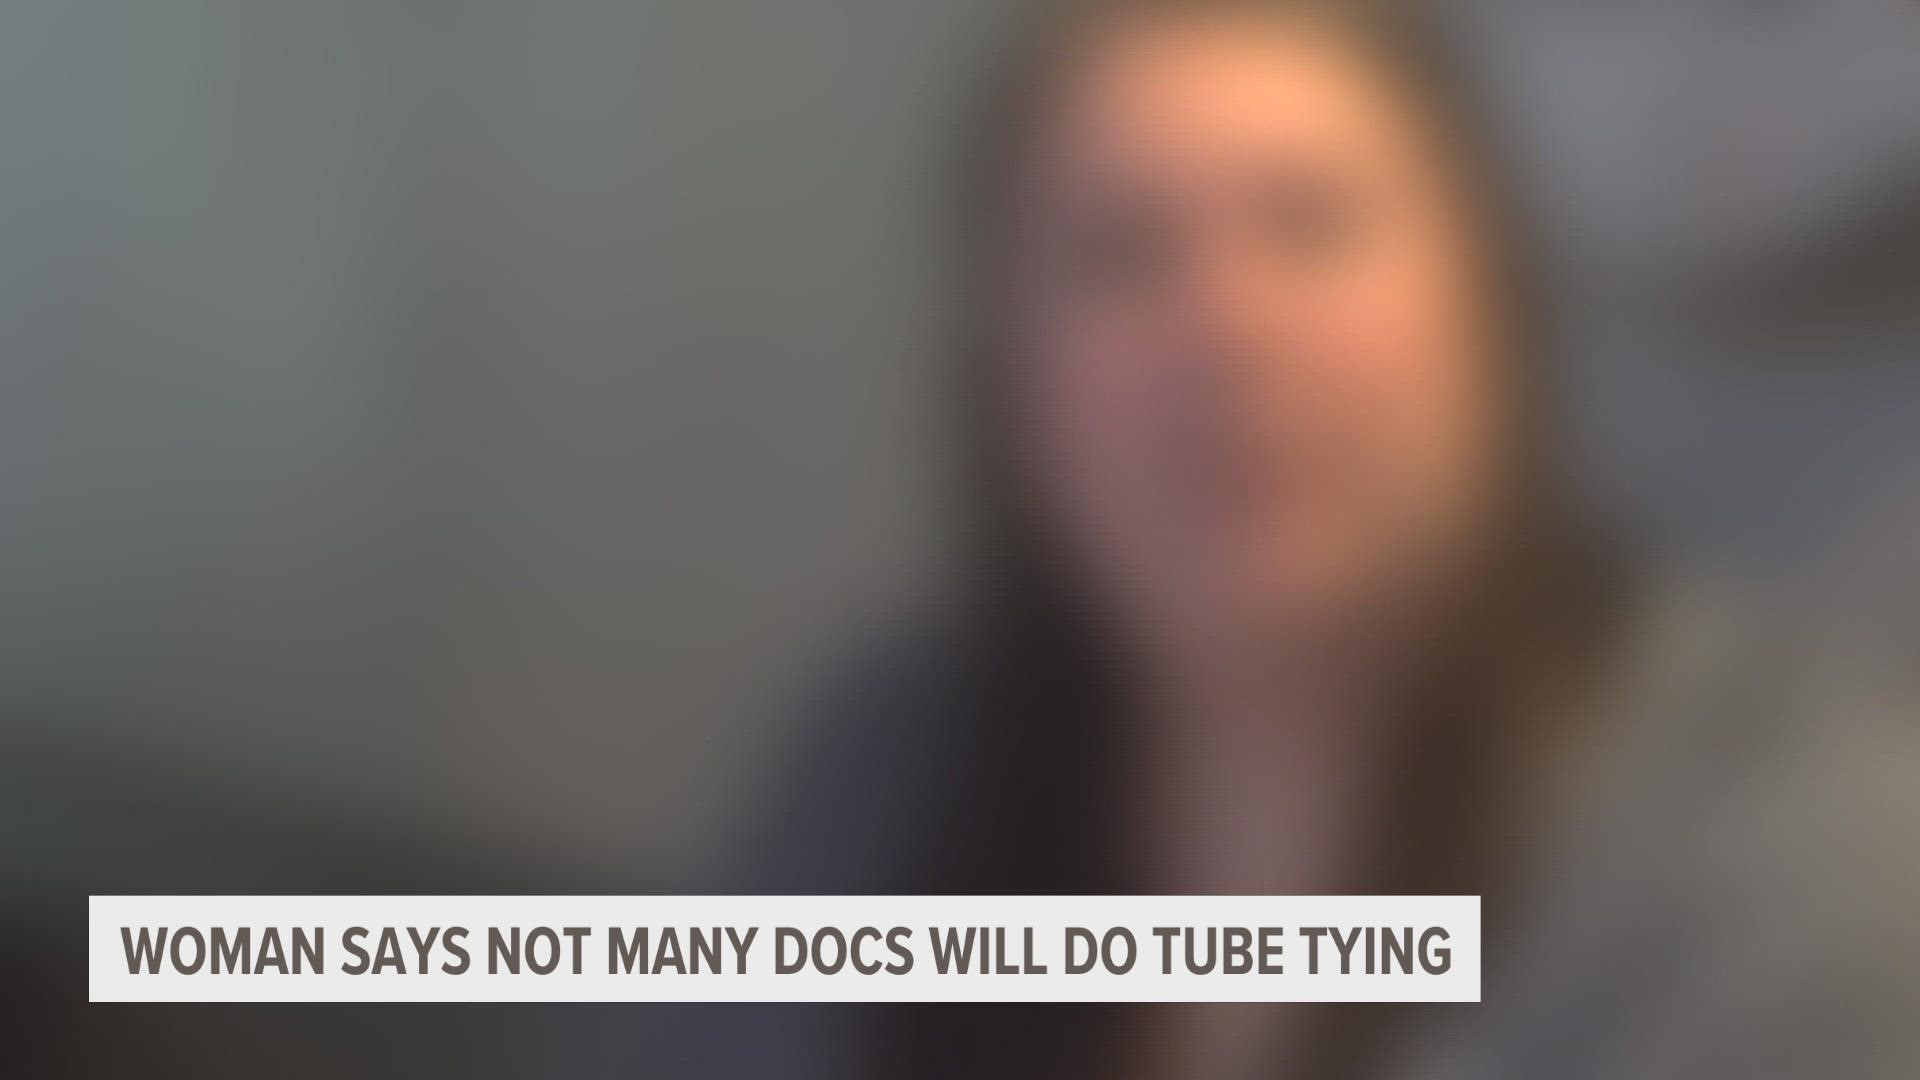 Ottawa County woman shares the difficulty she's had finding a doctor who will sterilize her.